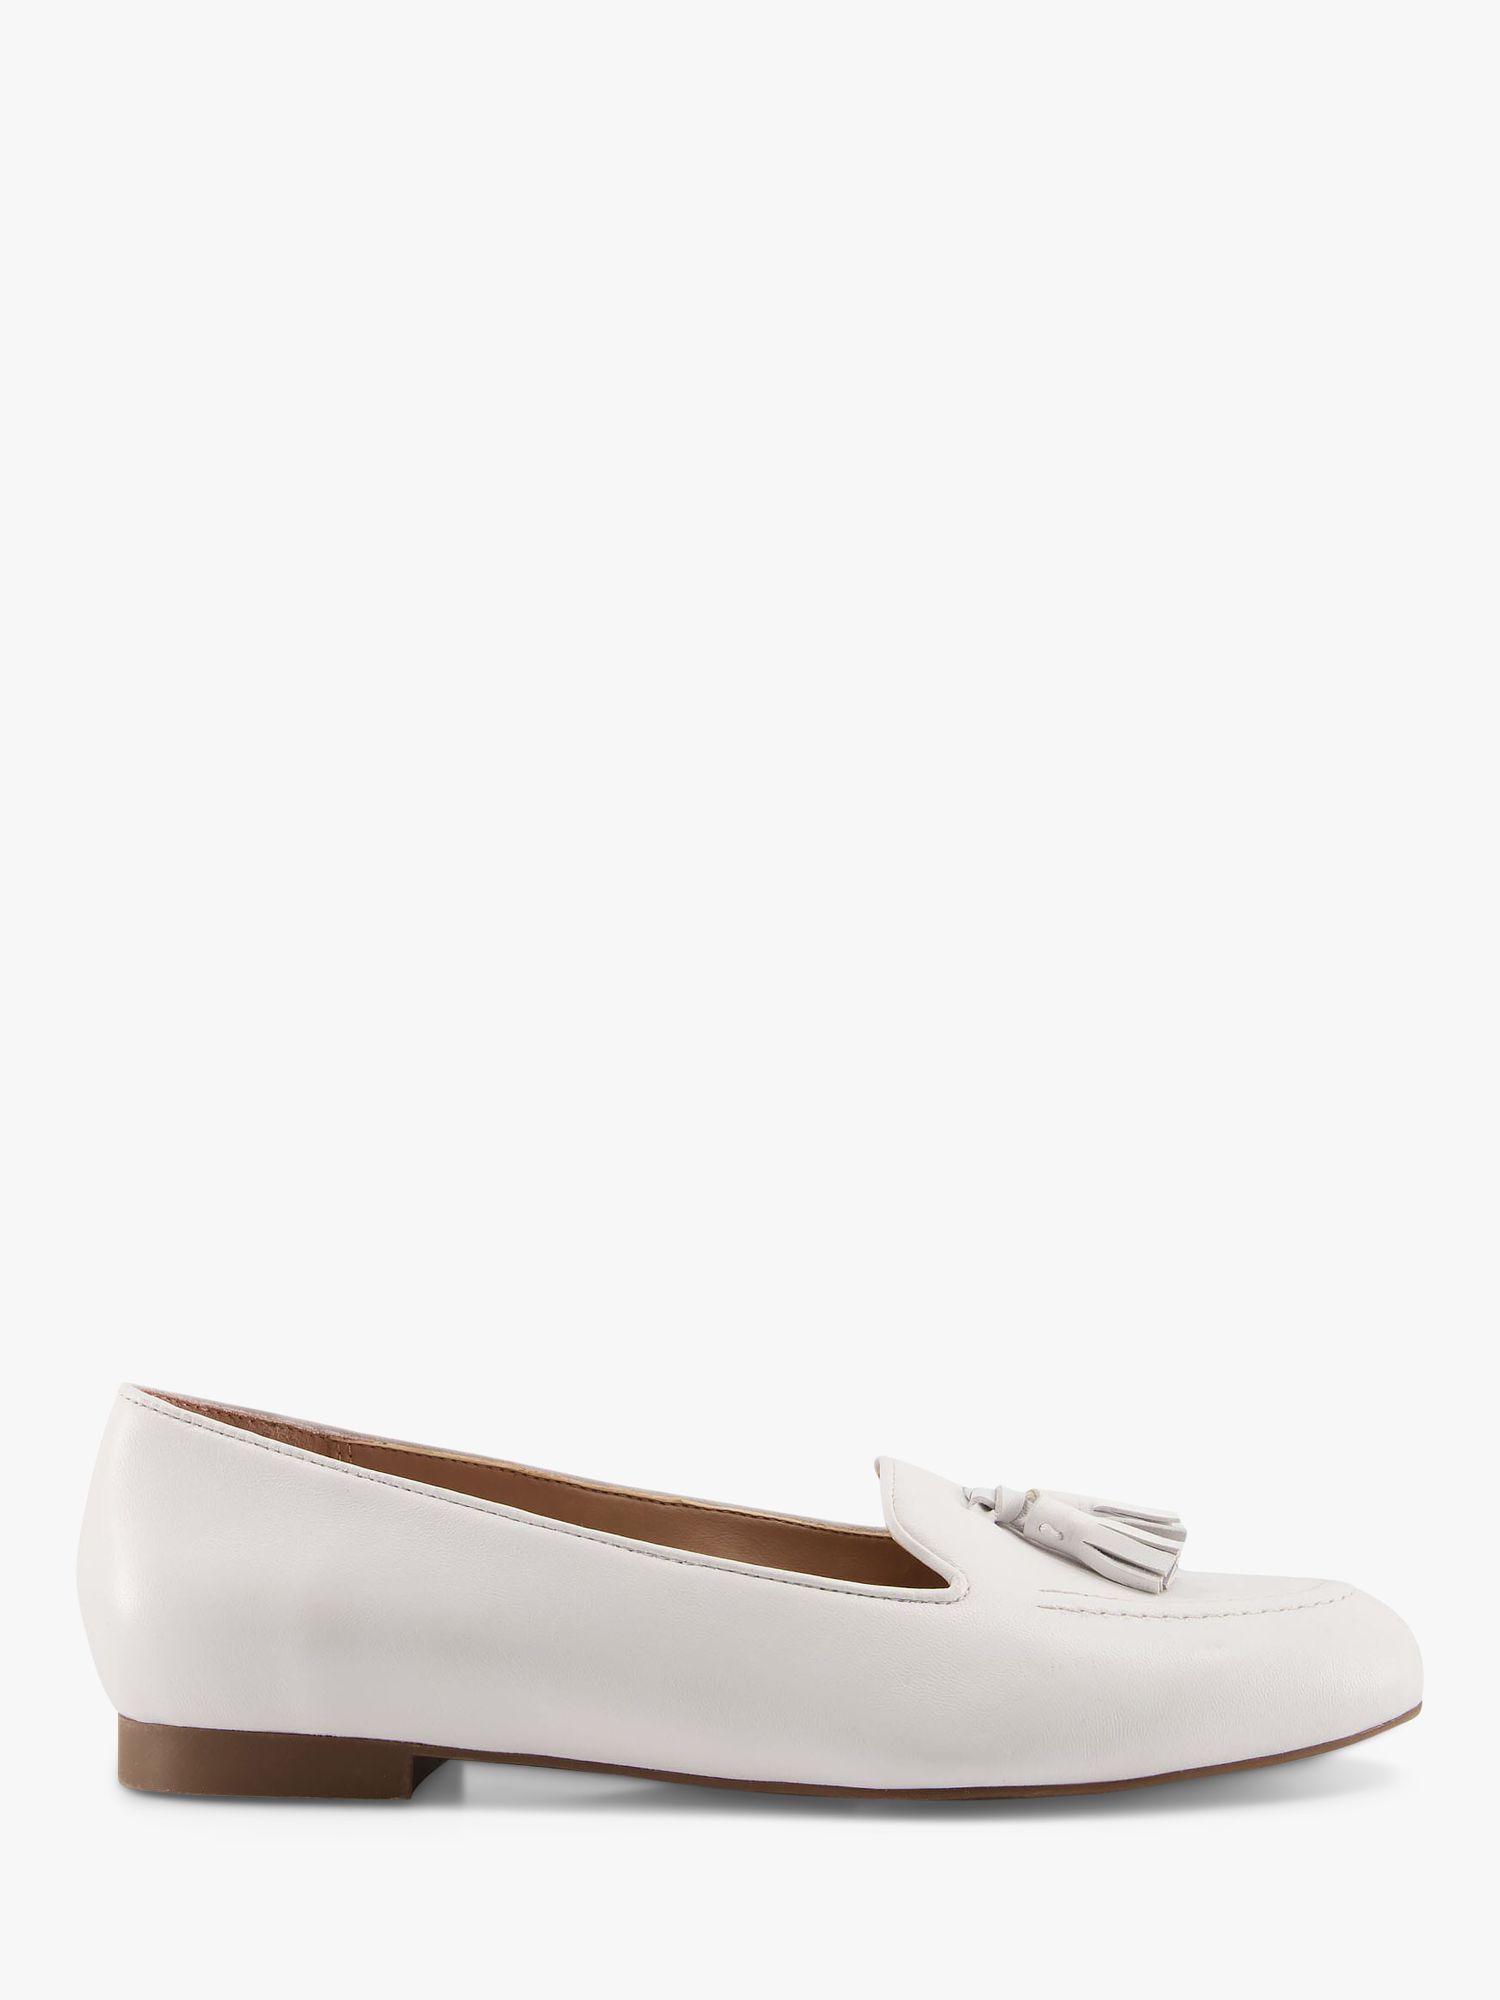 Dune Gallerie Leather Tassel Loafers, White at John Lewis & Partners